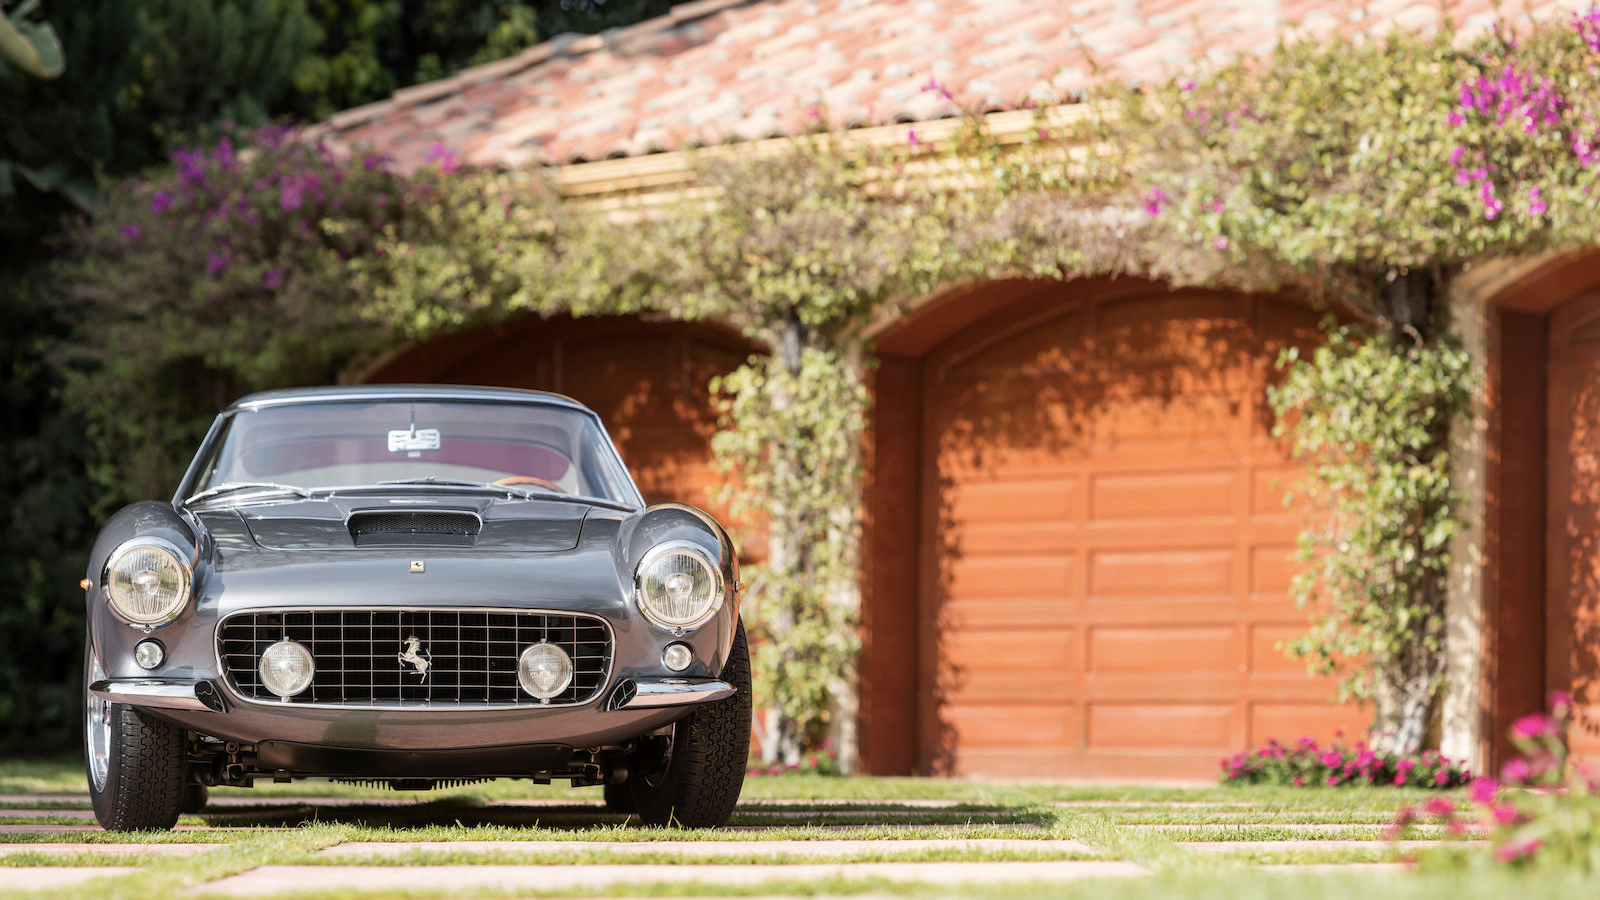 This pristine Ferrari is too good to be valued